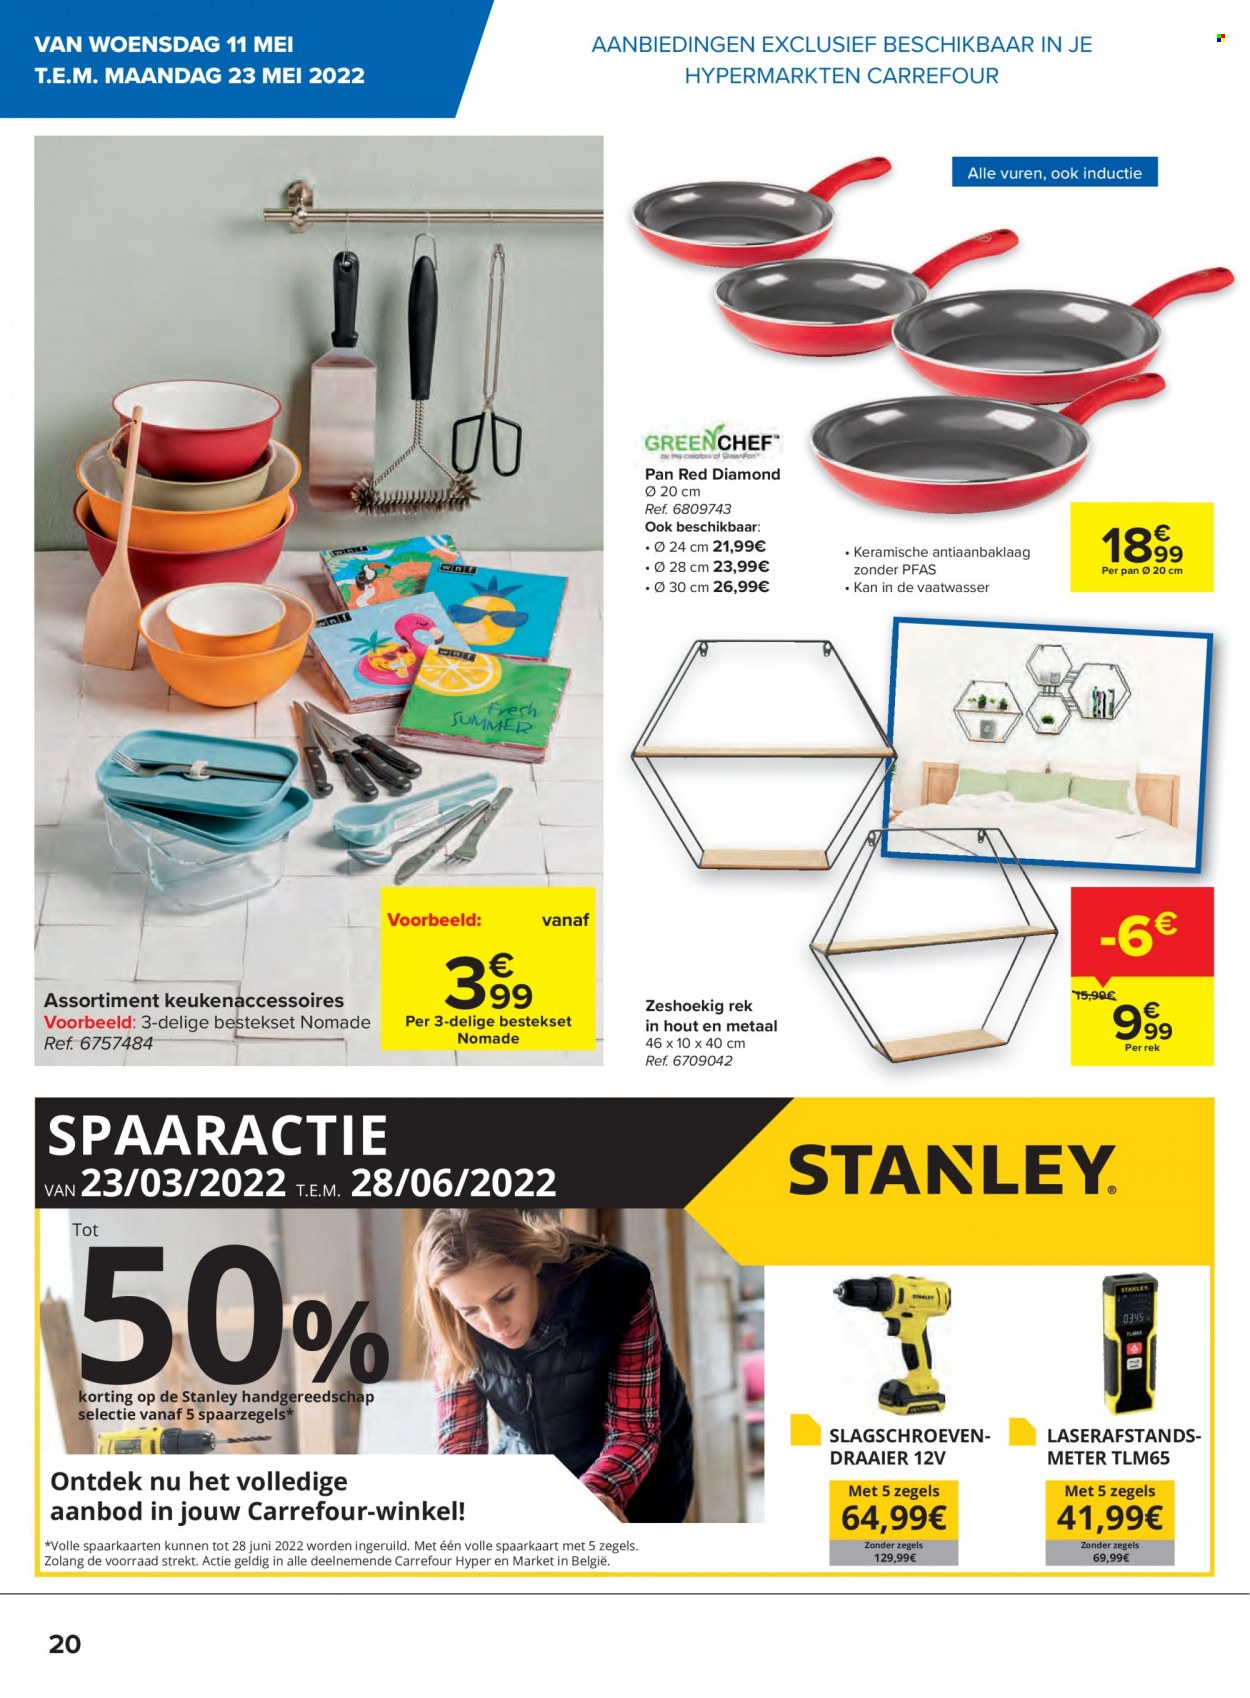 Catalogue Carrefour hypermarkt - 11.5.2022 - 23.5.2022. Page 20.